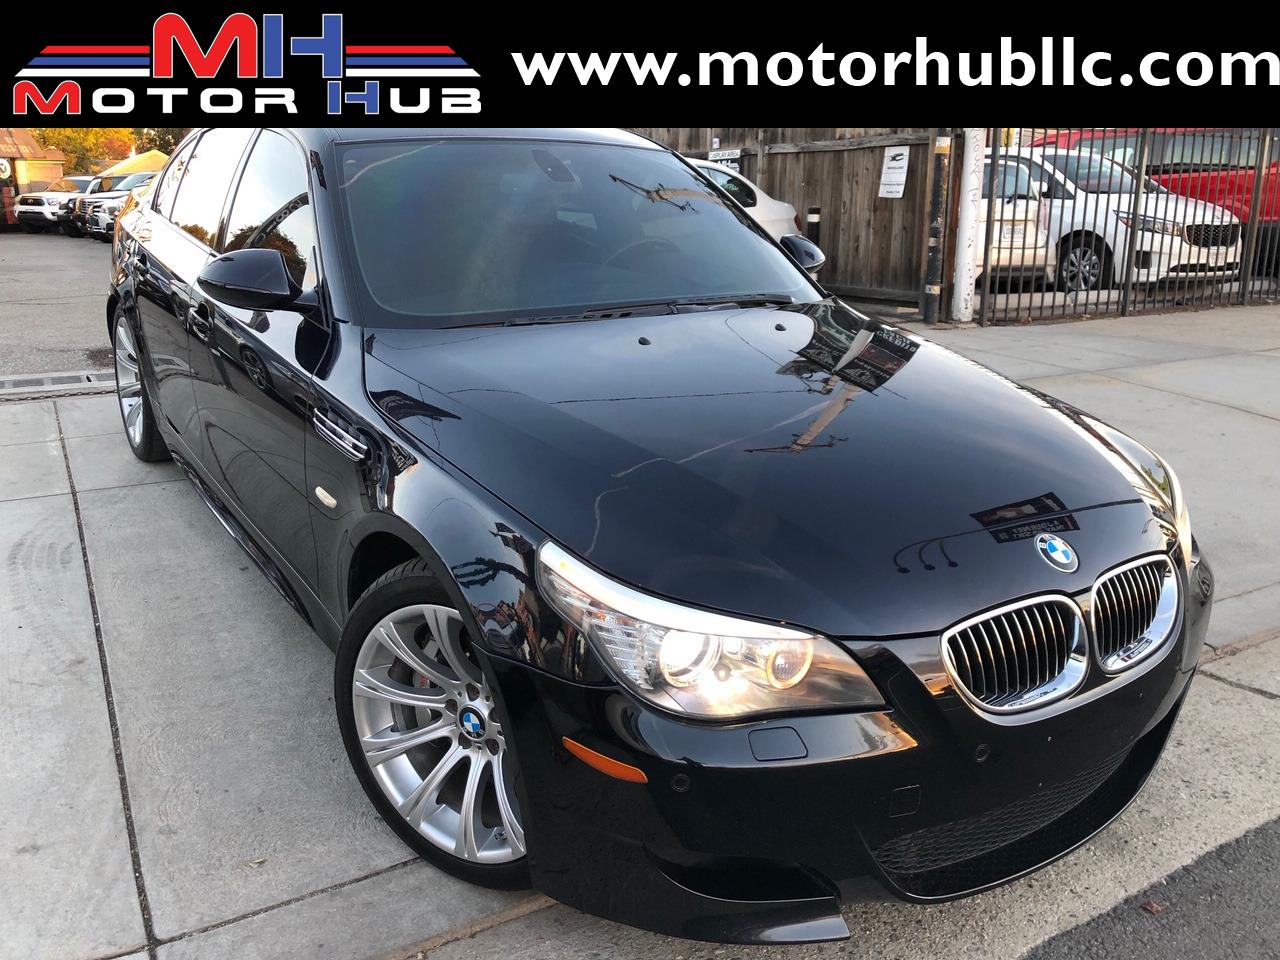 2010 BMW M5 BASE Stock # 043125 for sale near Van Nuys, CA